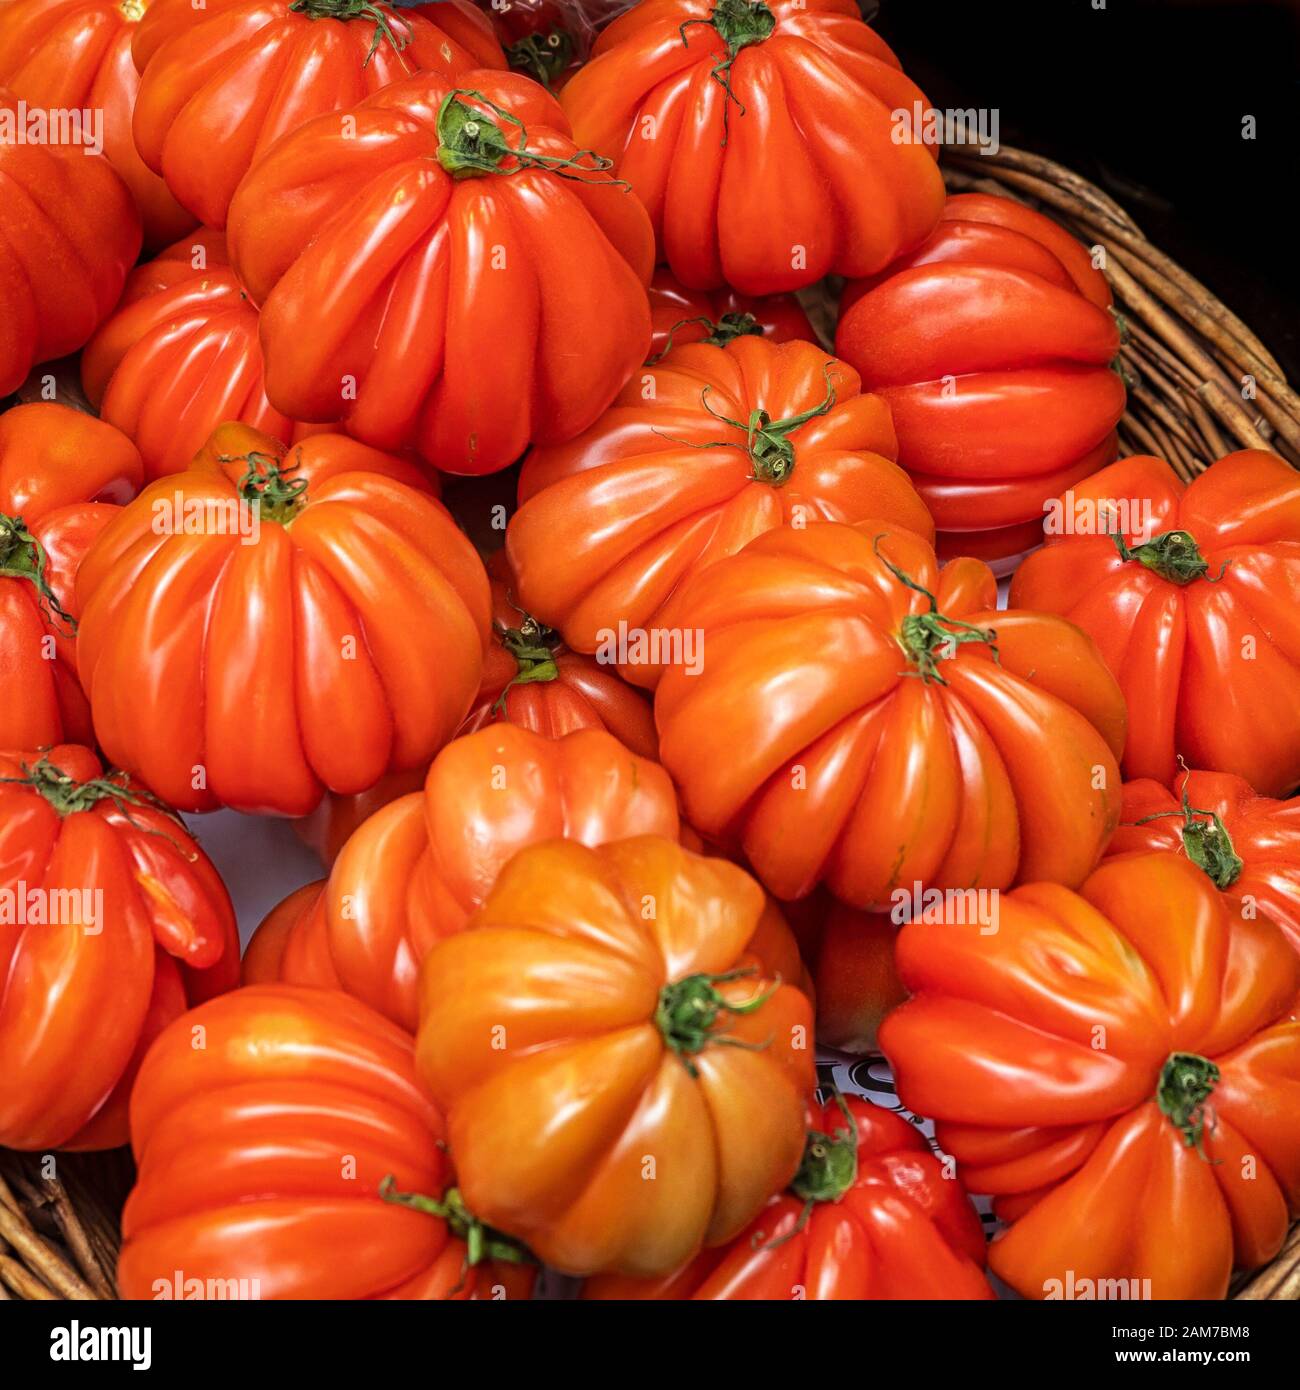 Large ripe Oxheart Tomatoes in a basket at a food market Stock Photo